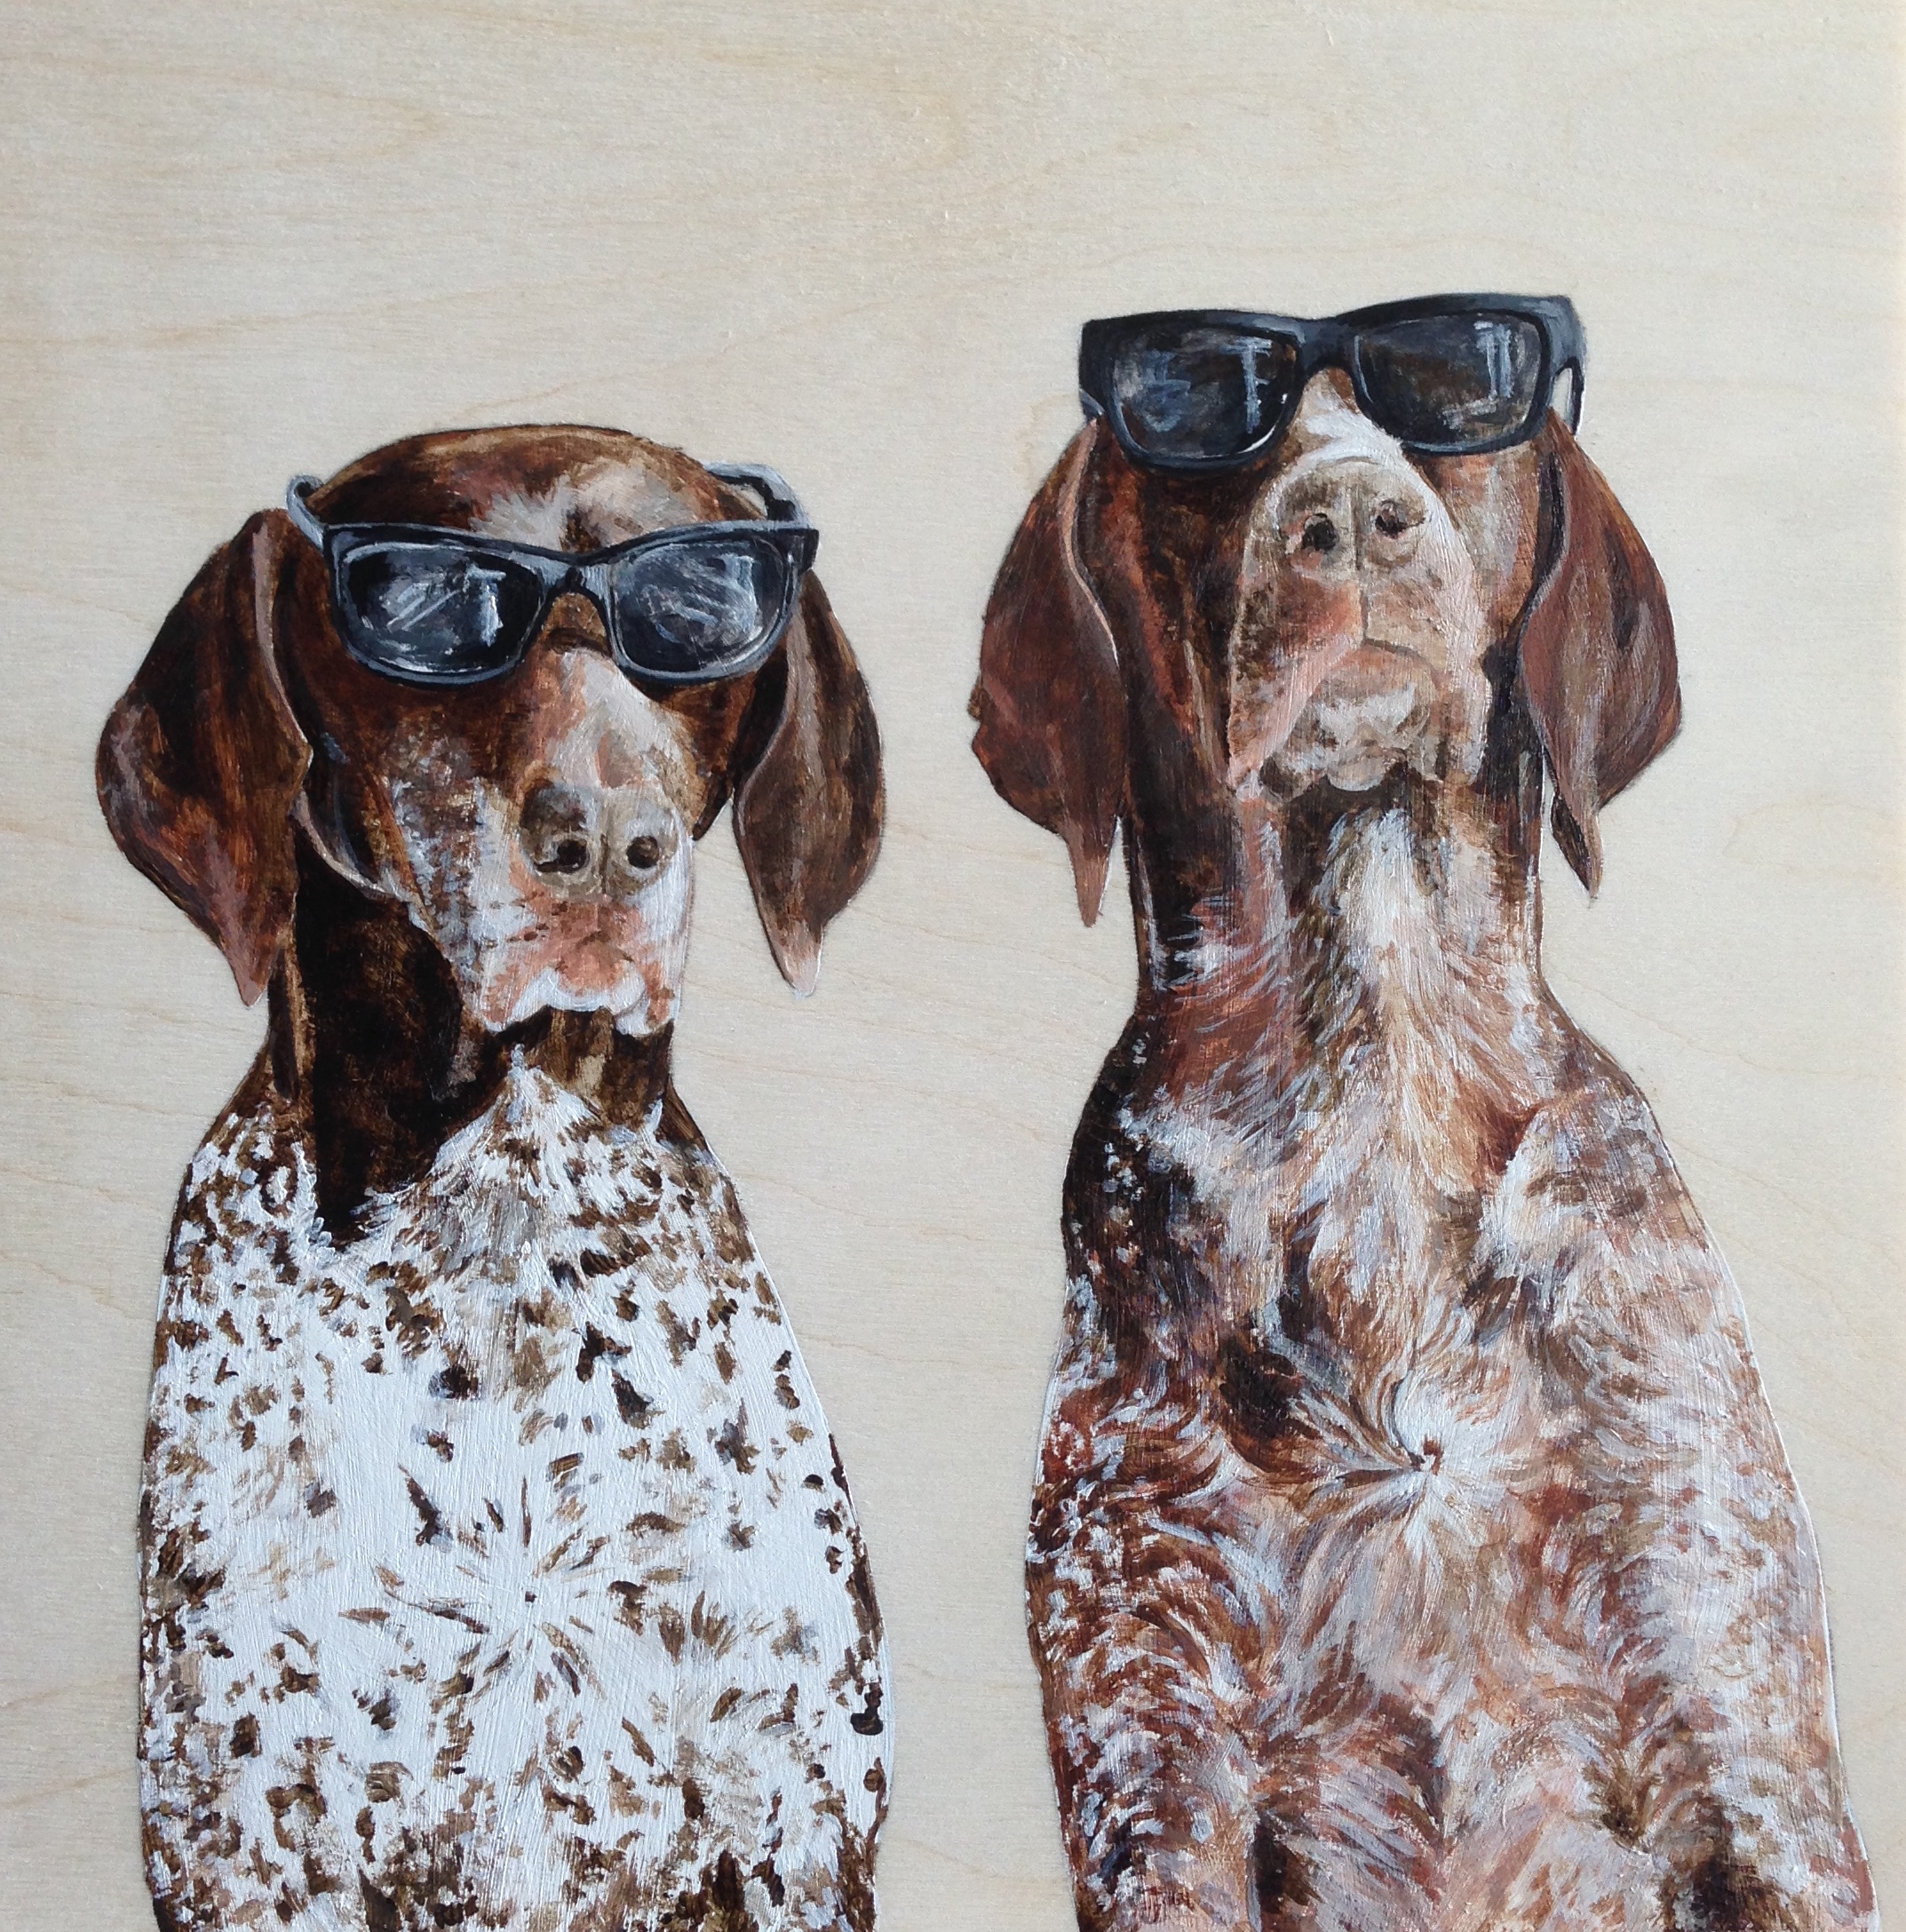  Cool dudes the Pointer Brothers. Acrylic on Wood. @ifitwags 